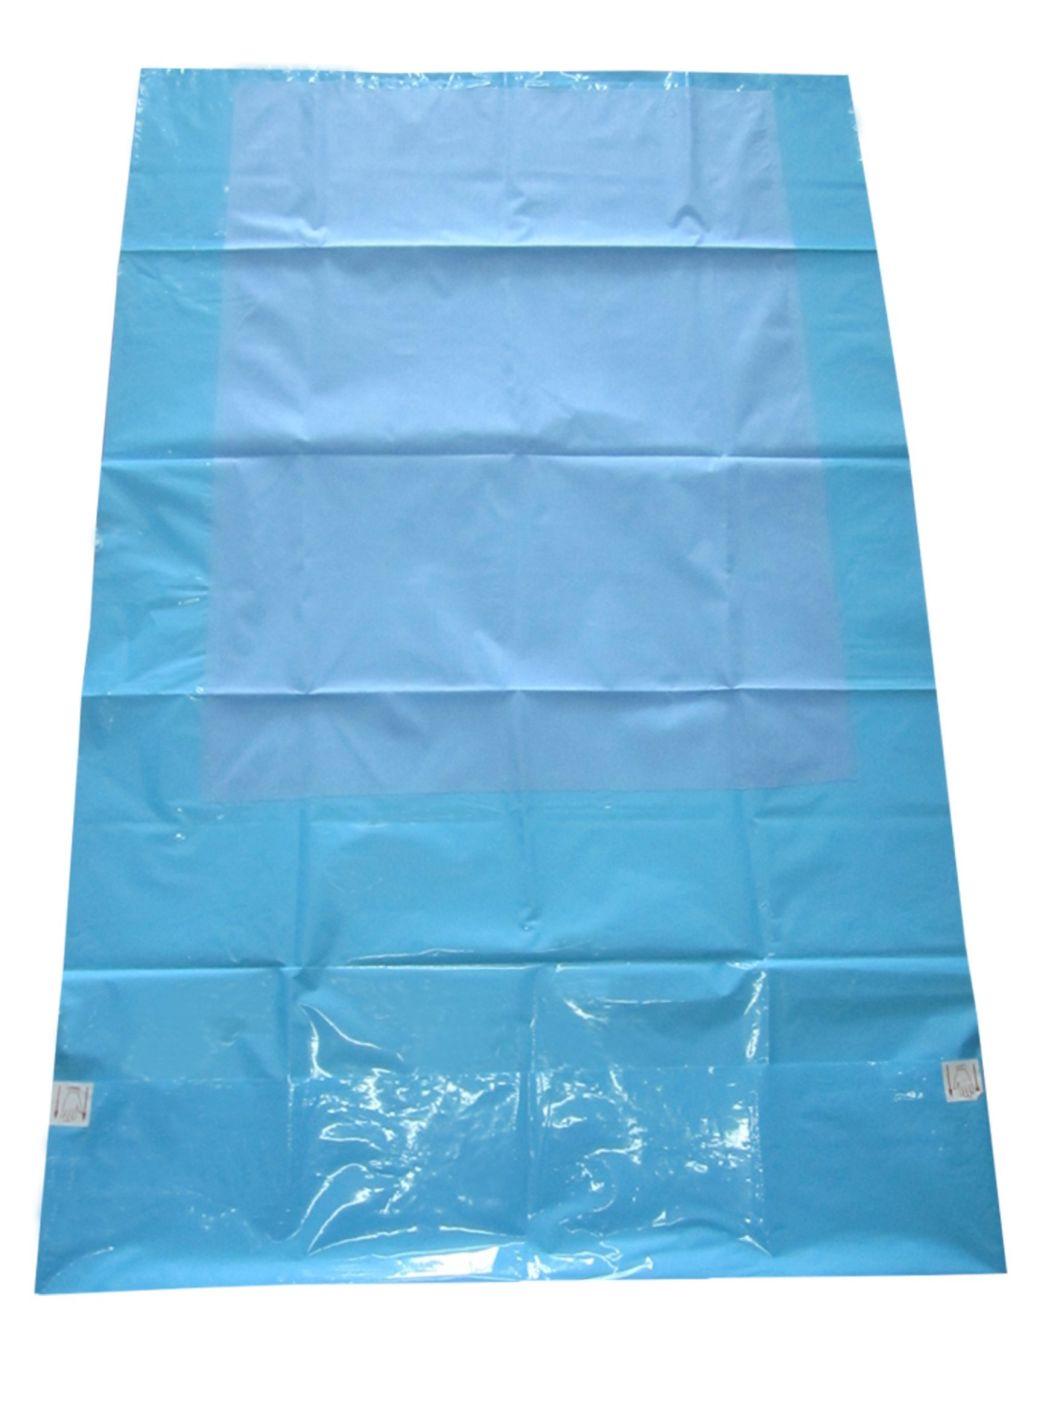 Sterile Table Mayo Cover with Non Woven SMS/PP /Viscose